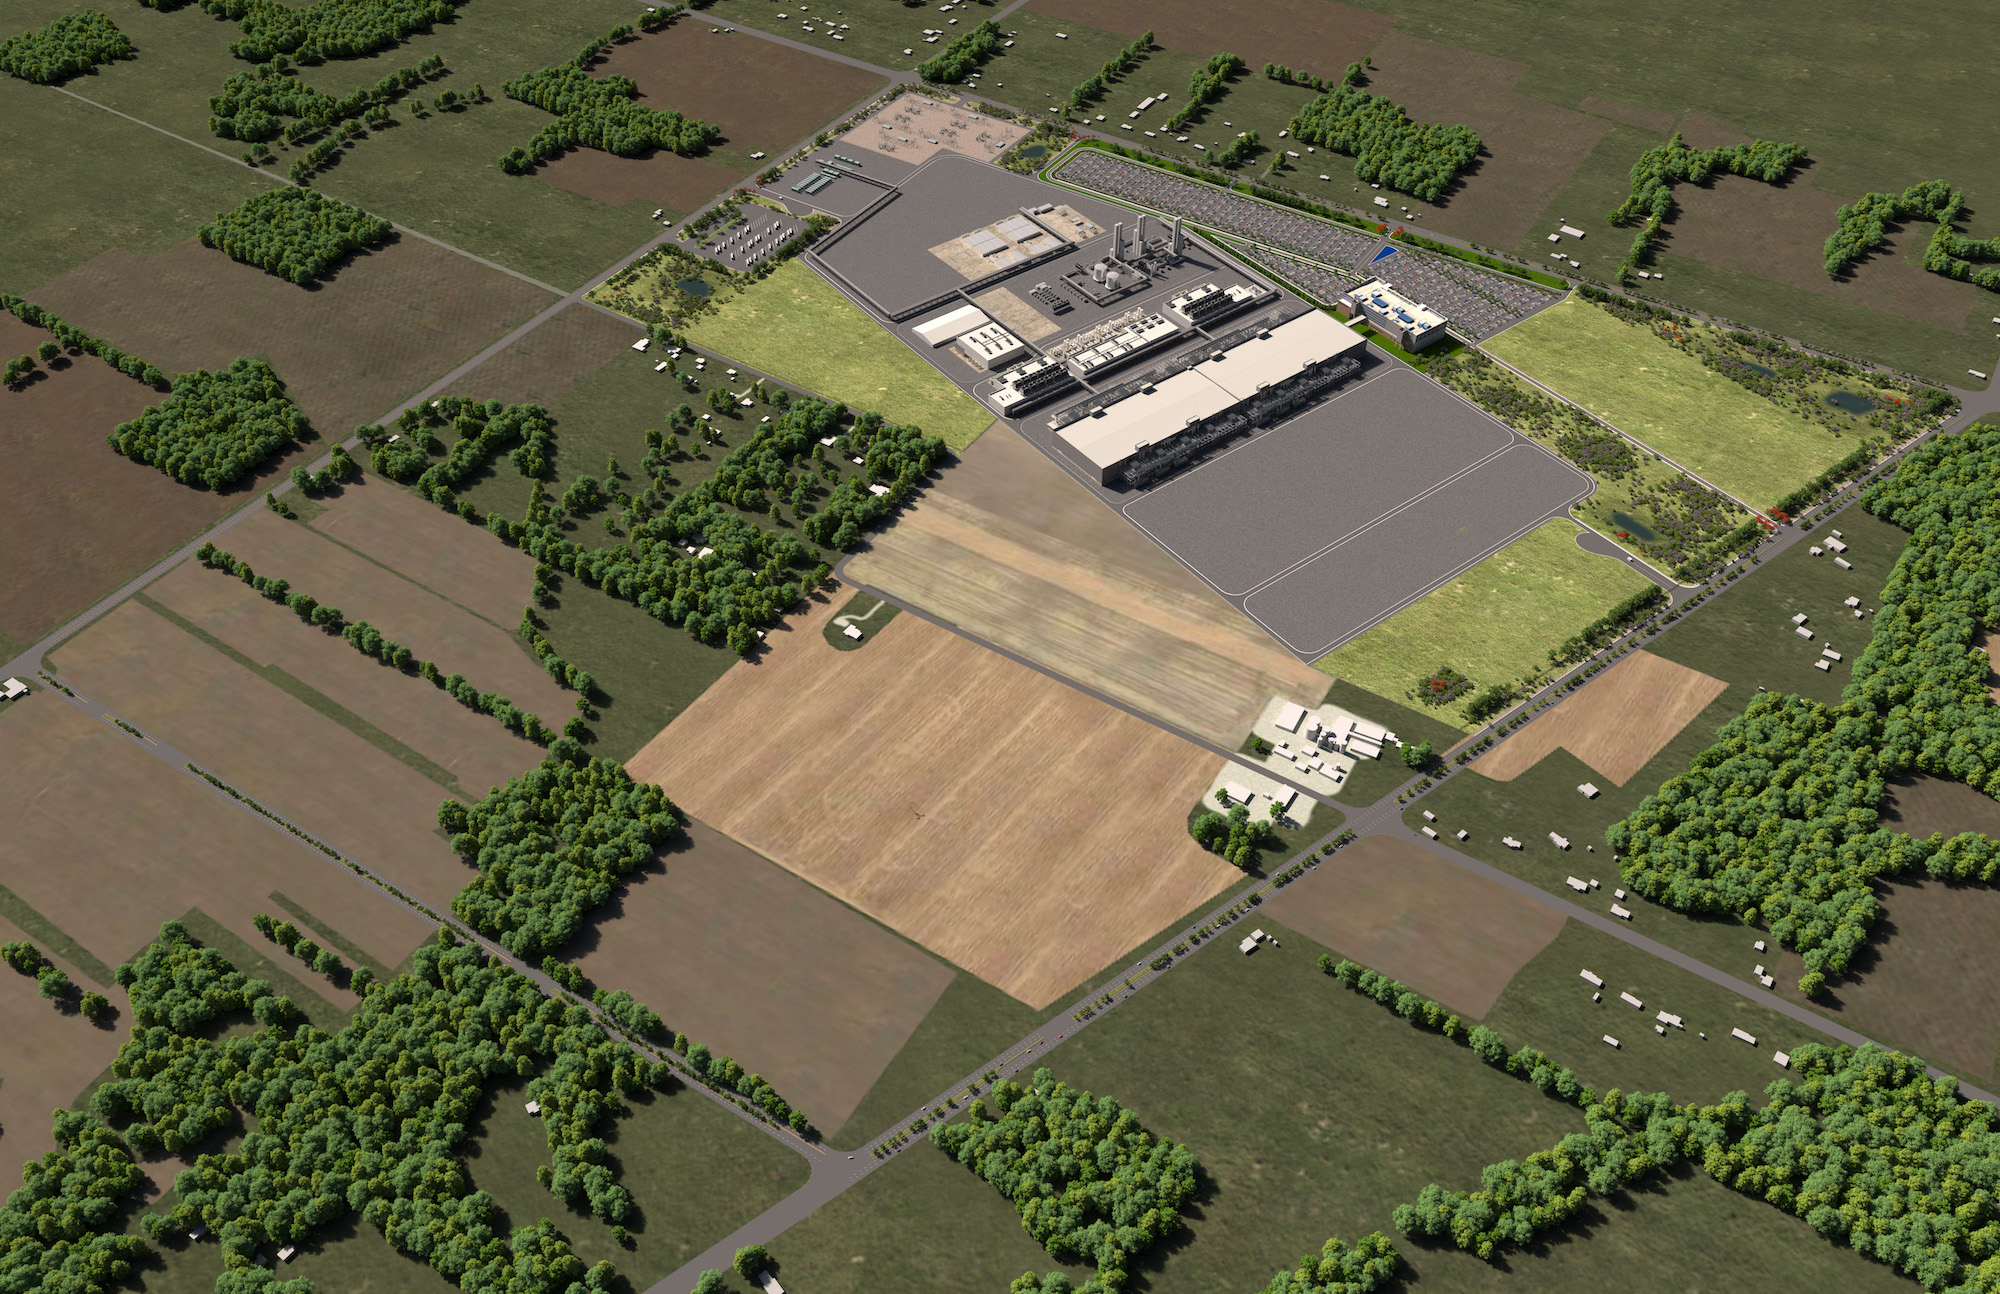 Intel released this rendering in January of new semiconductor facilities it plans to build in Ohio.